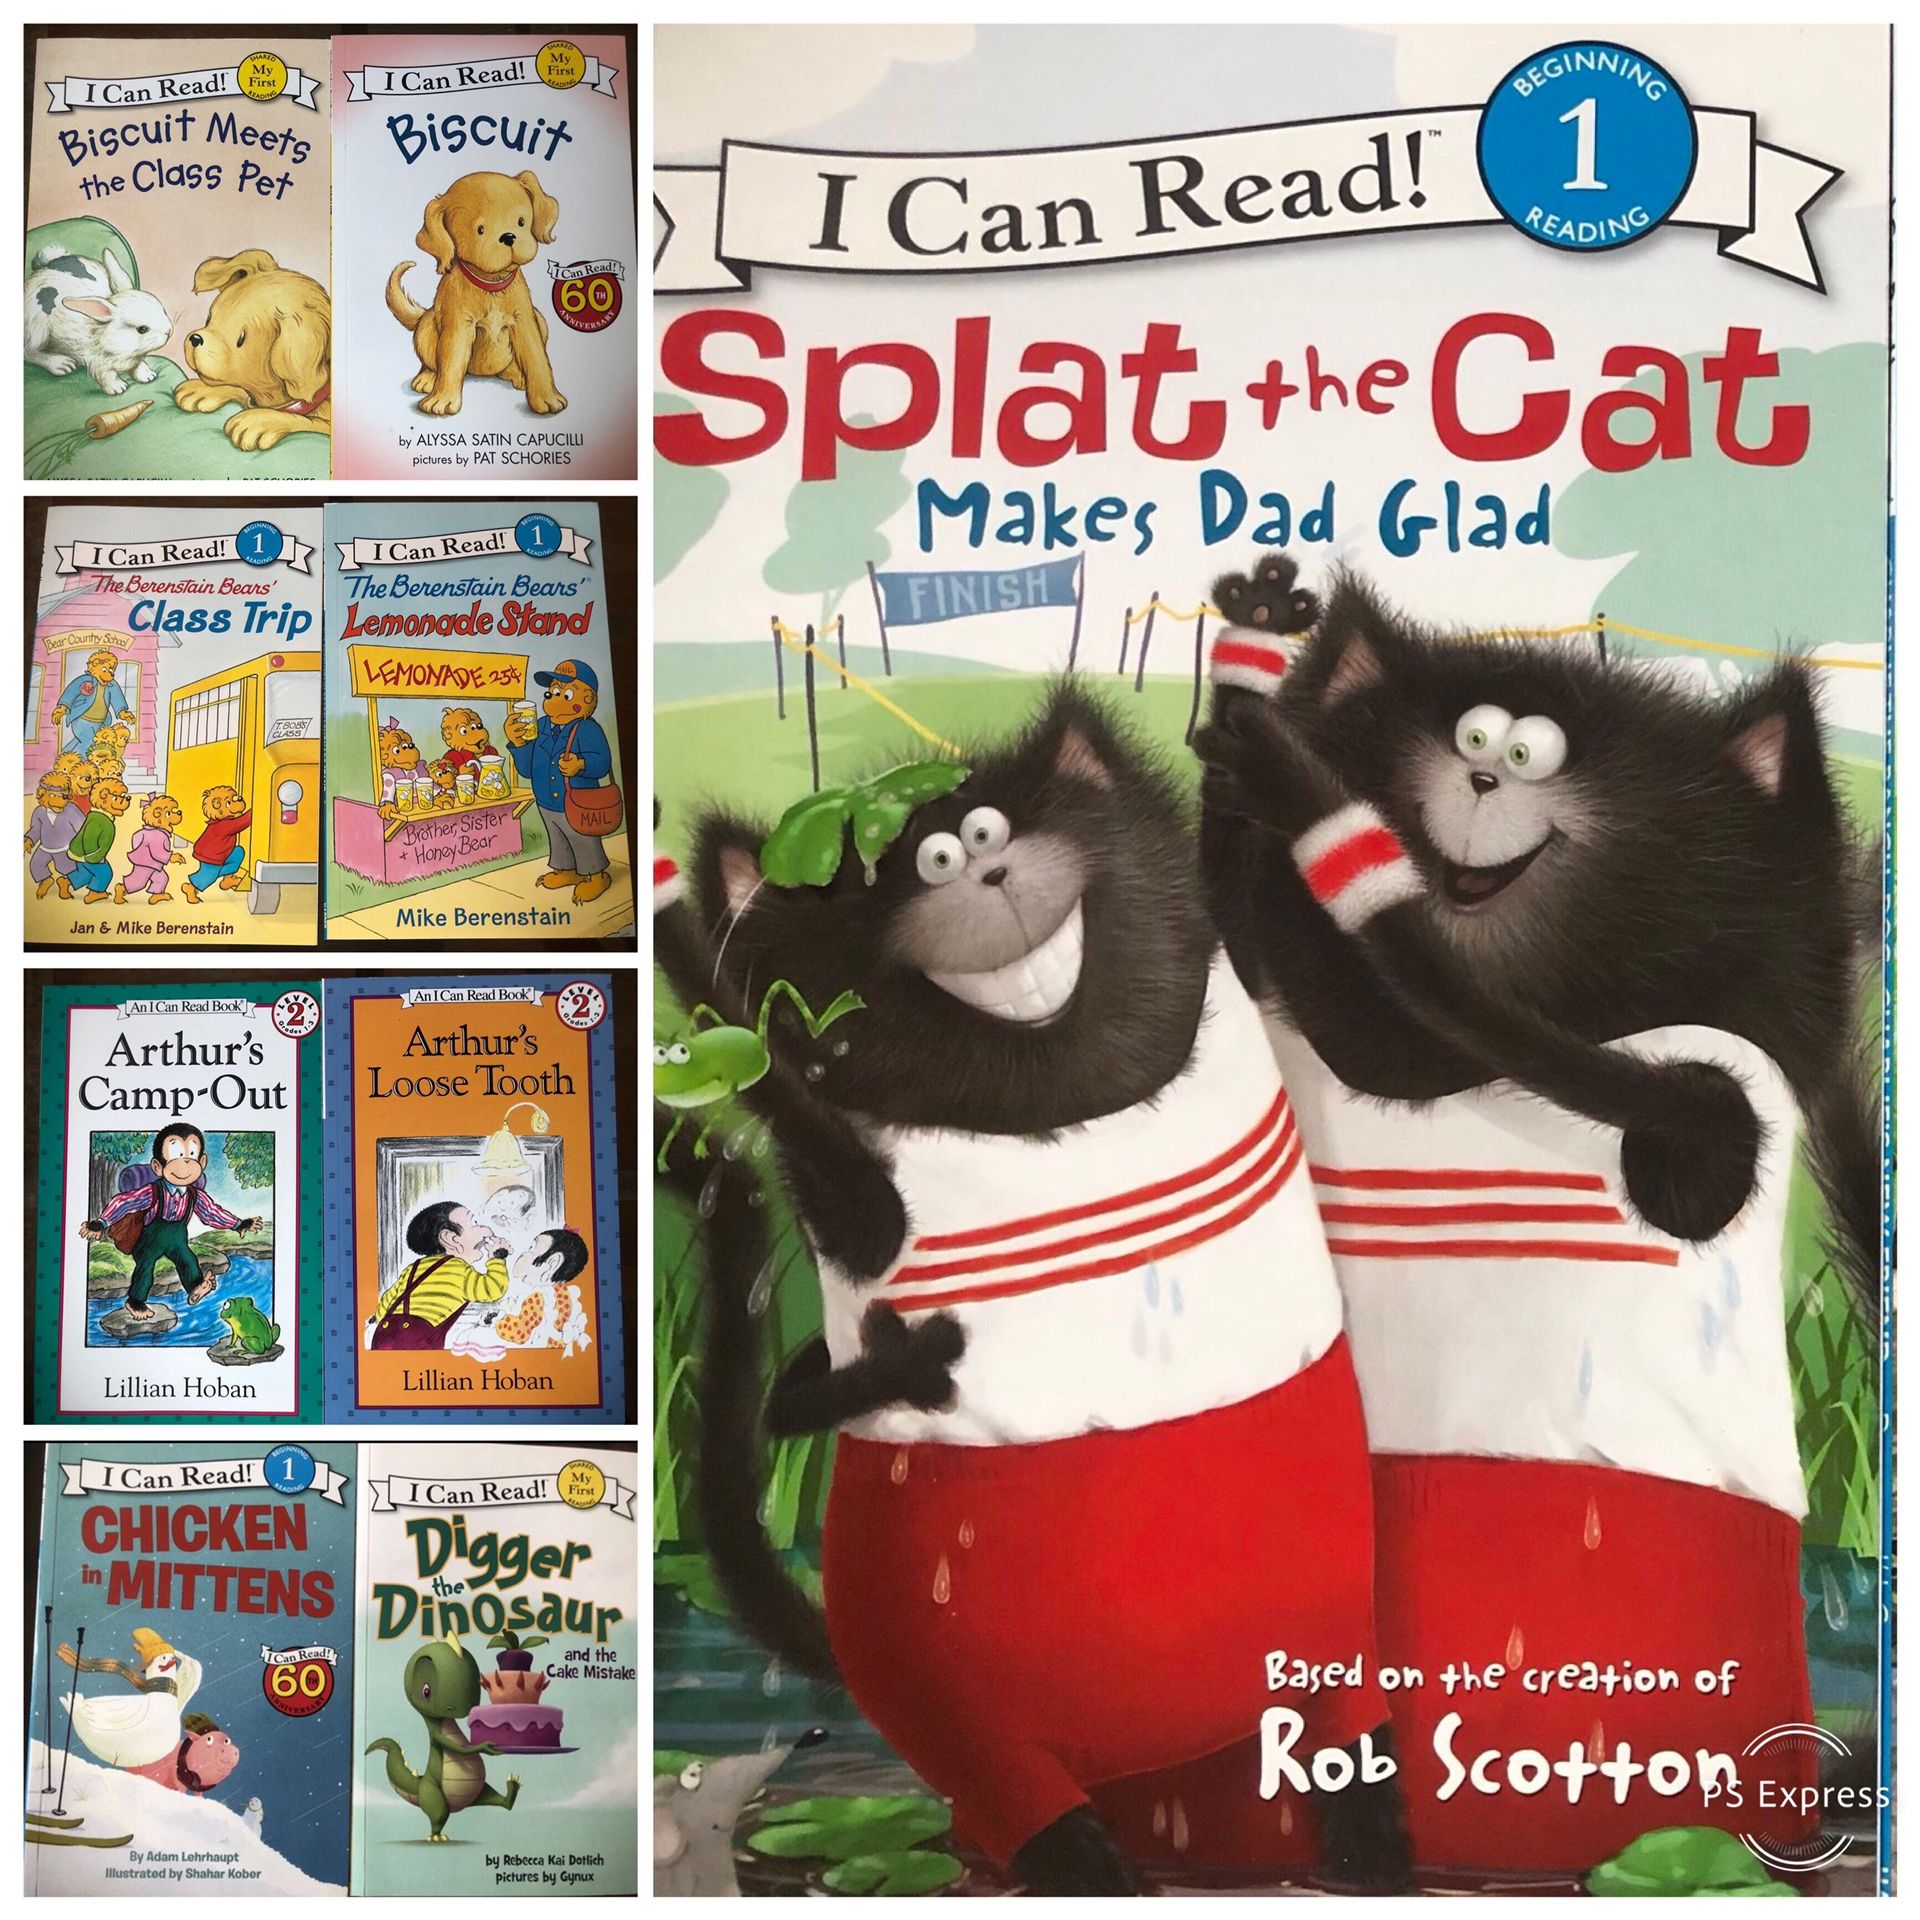 Lot book for children “I can read”